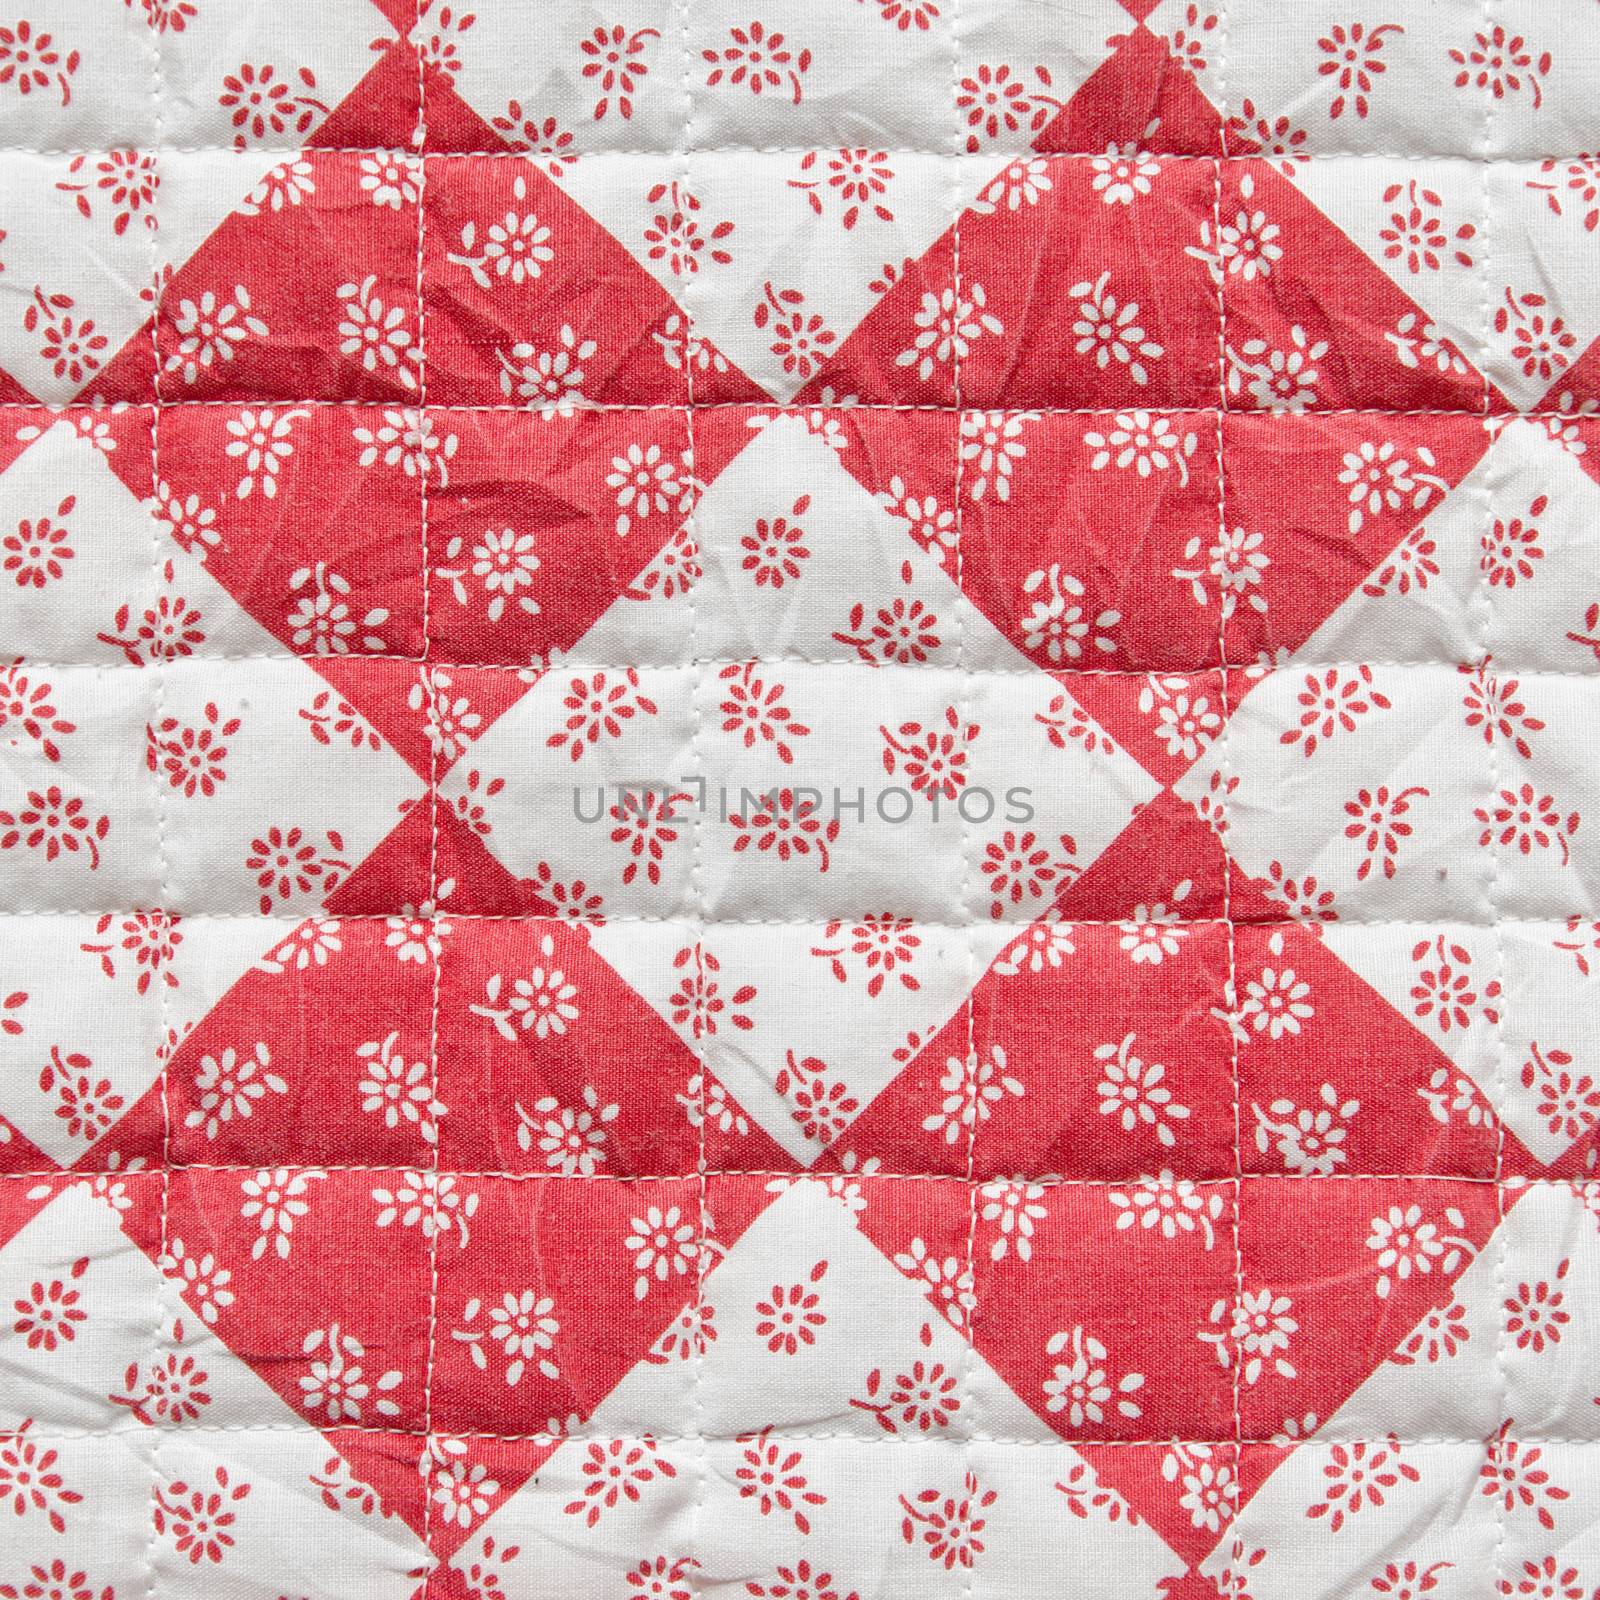 Red Square with Flowers Fabric Texture